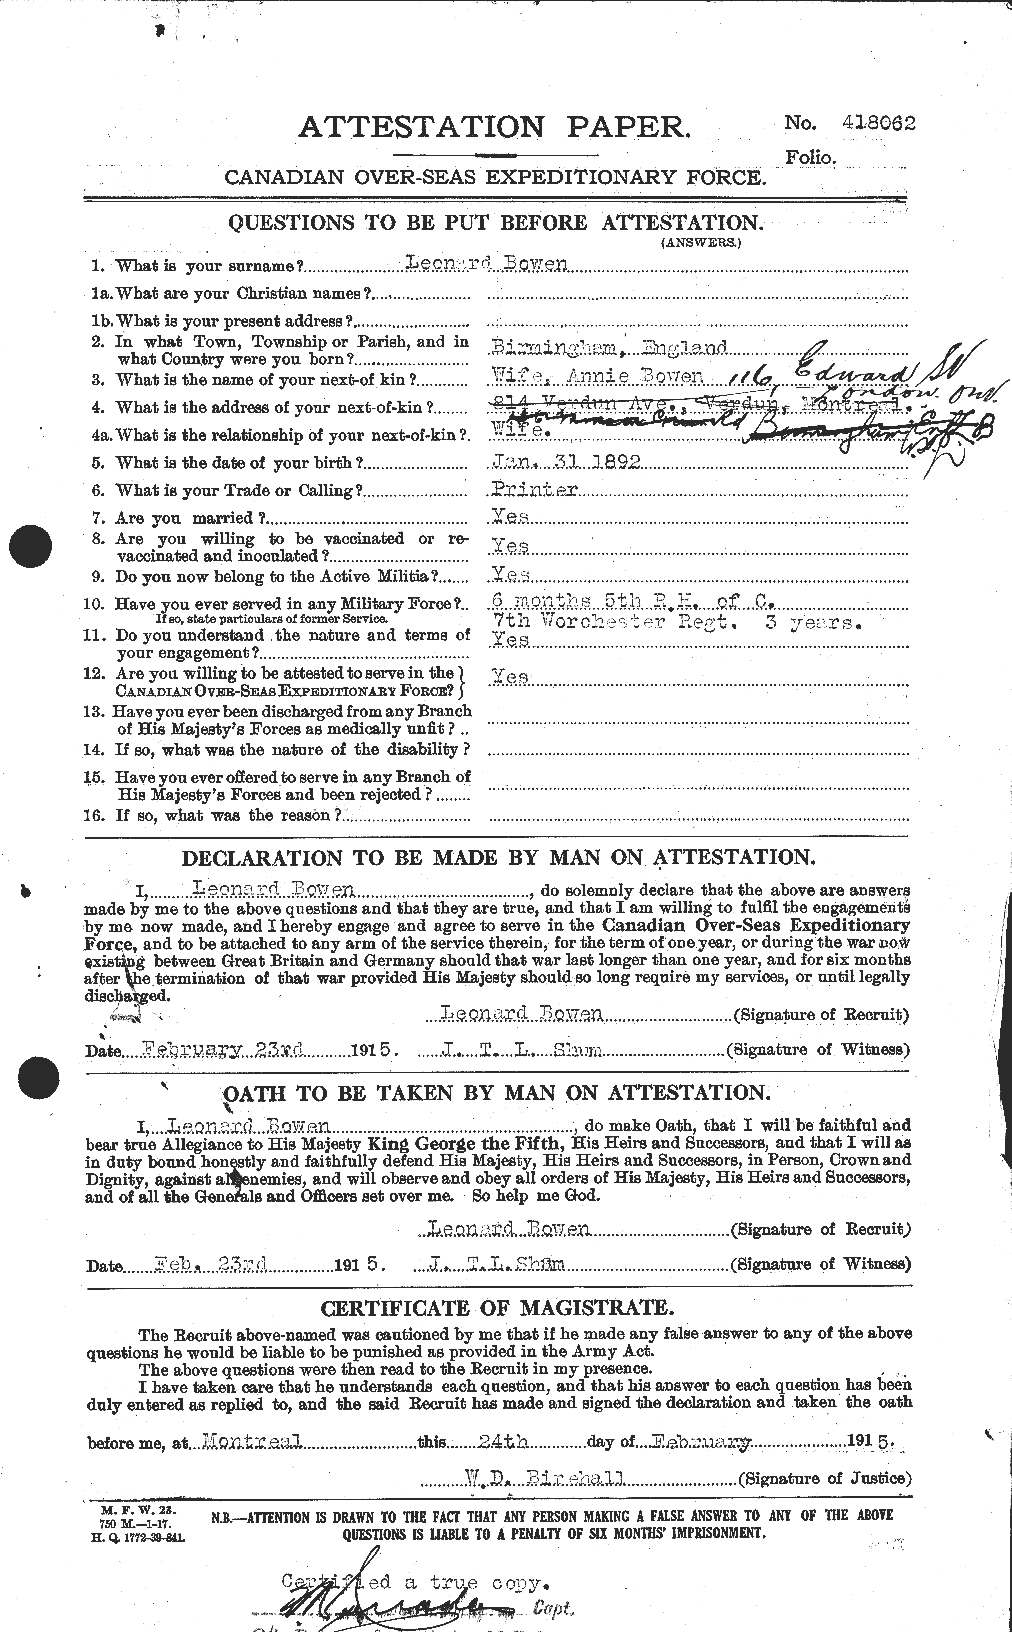 Personnel Records of the First World War - CEF 255447a